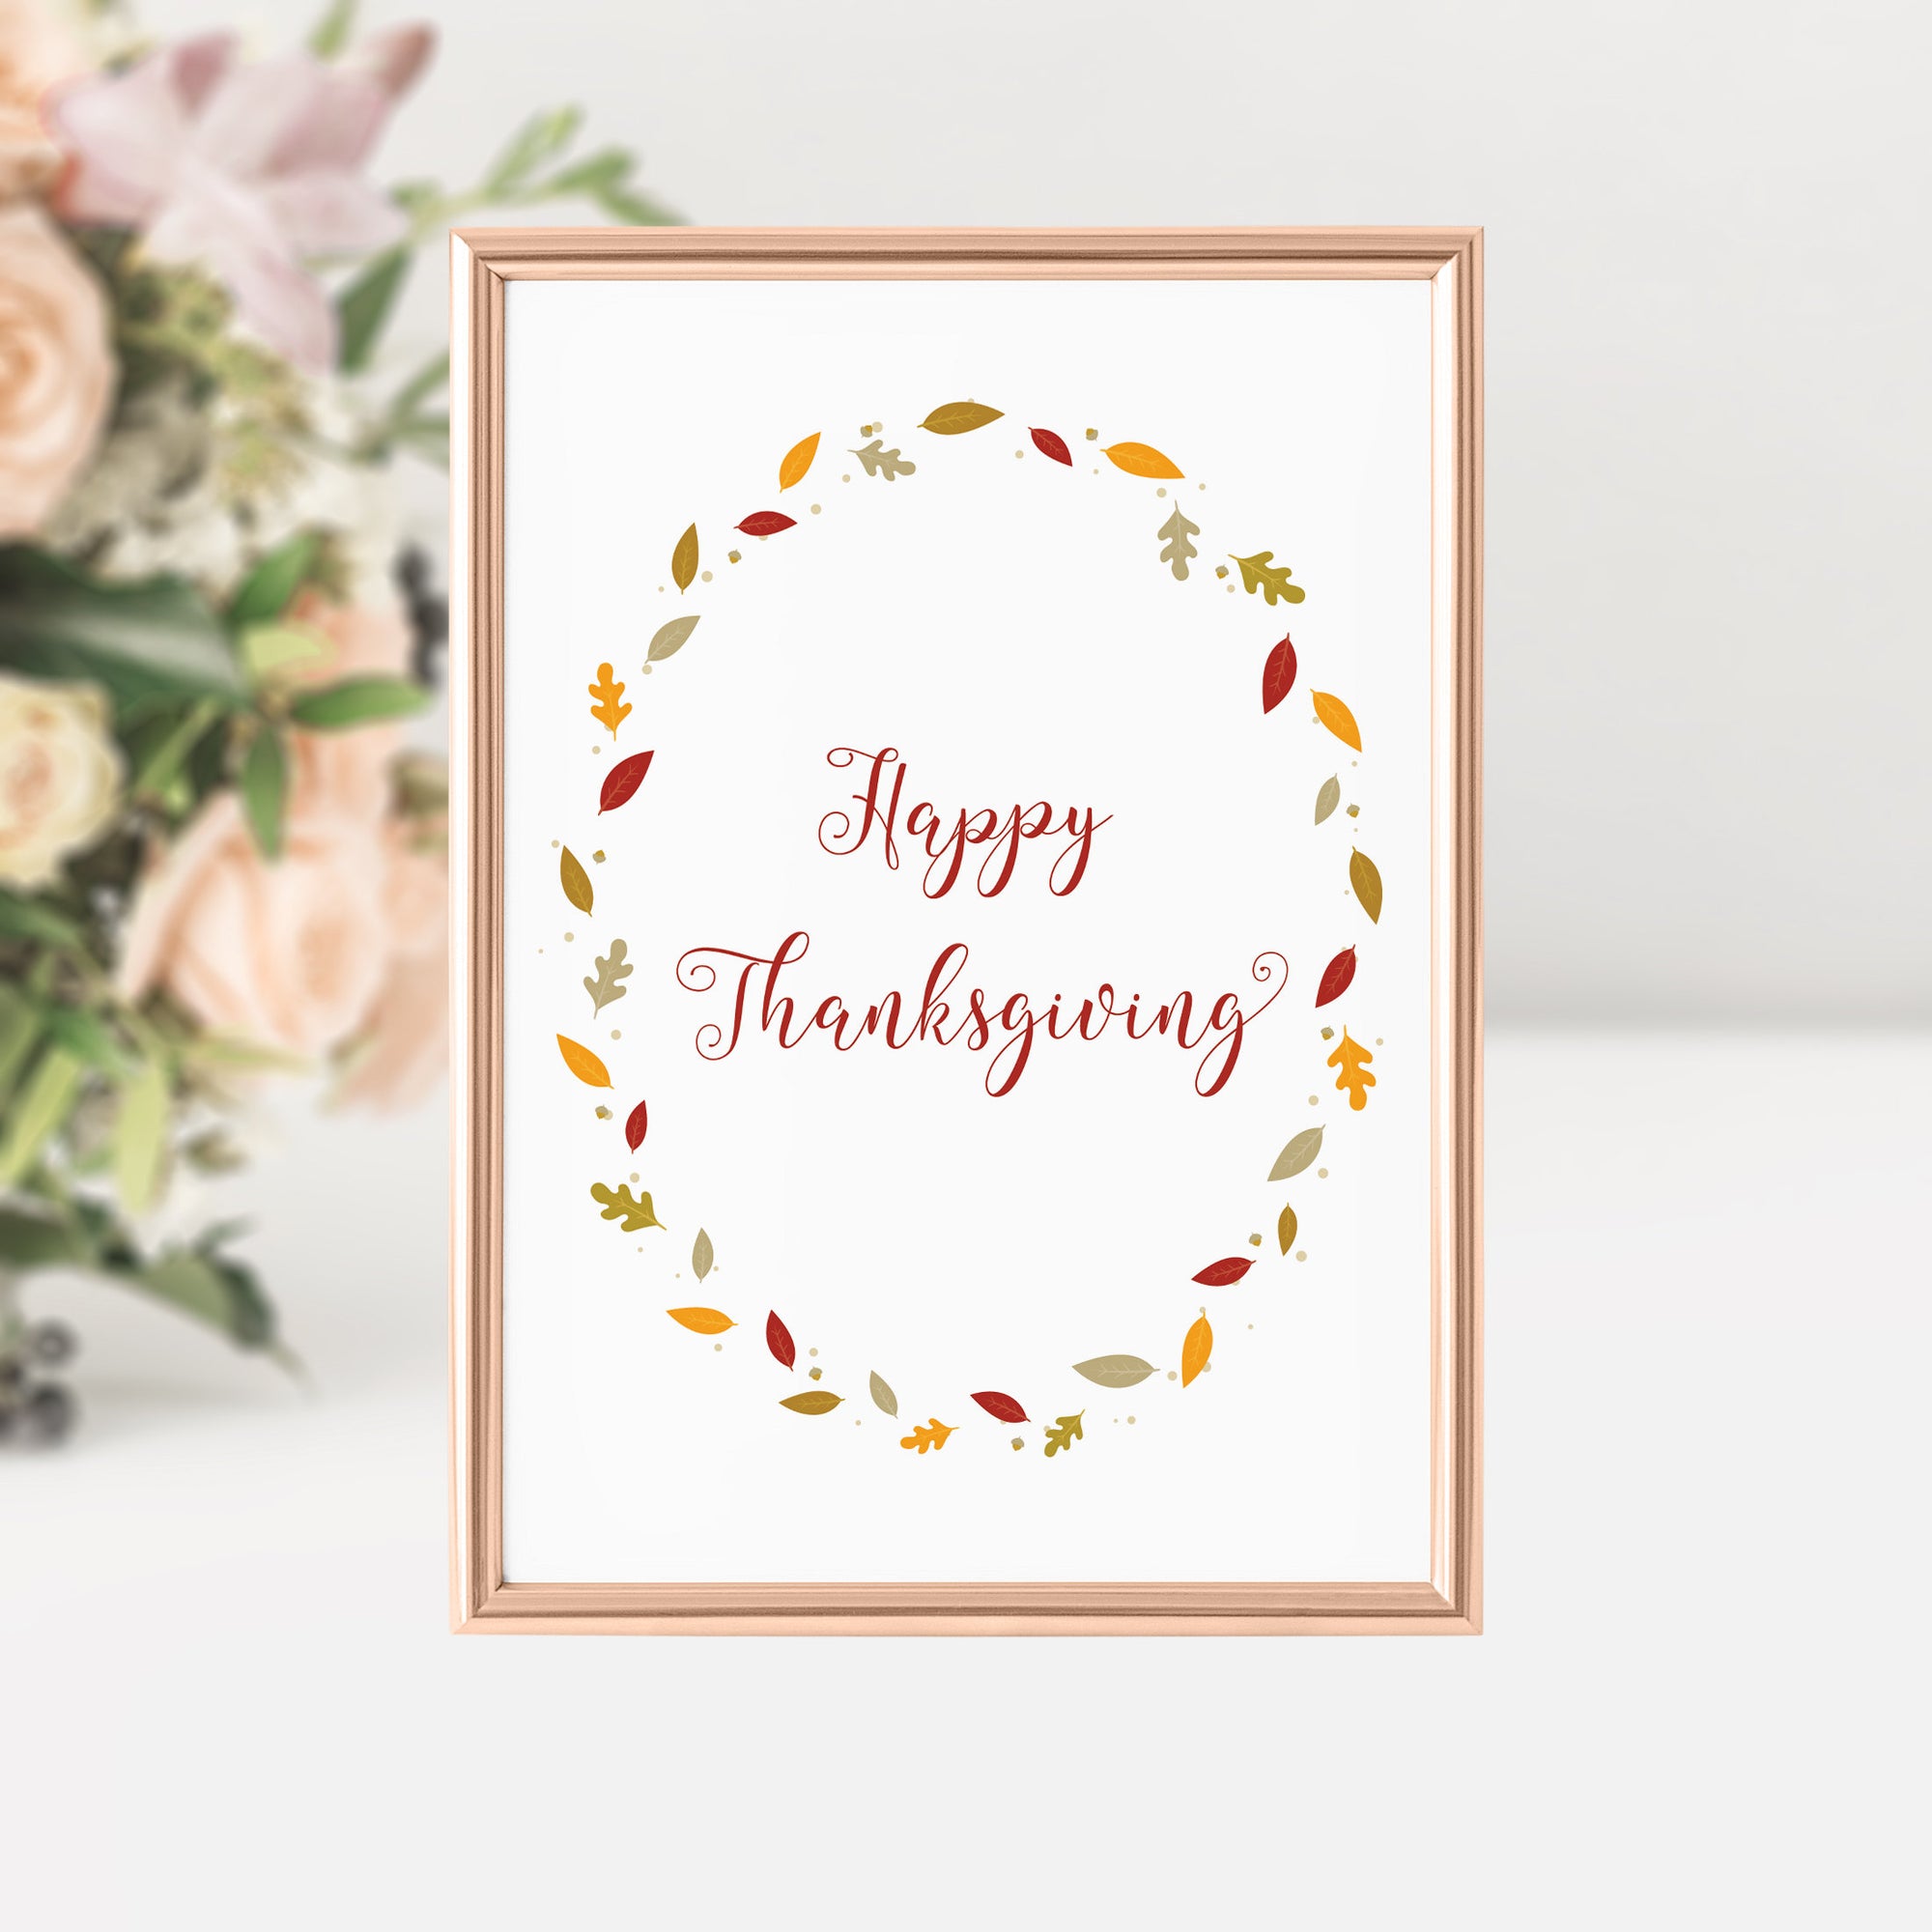 Happy Thanksgiving Sign, Thanksgiving Home Decor, Thanksgiving Signs Printable, Front Entrance Decor, INSTANT DOWNLOAD - FL100 - @PlumPolkaDot 